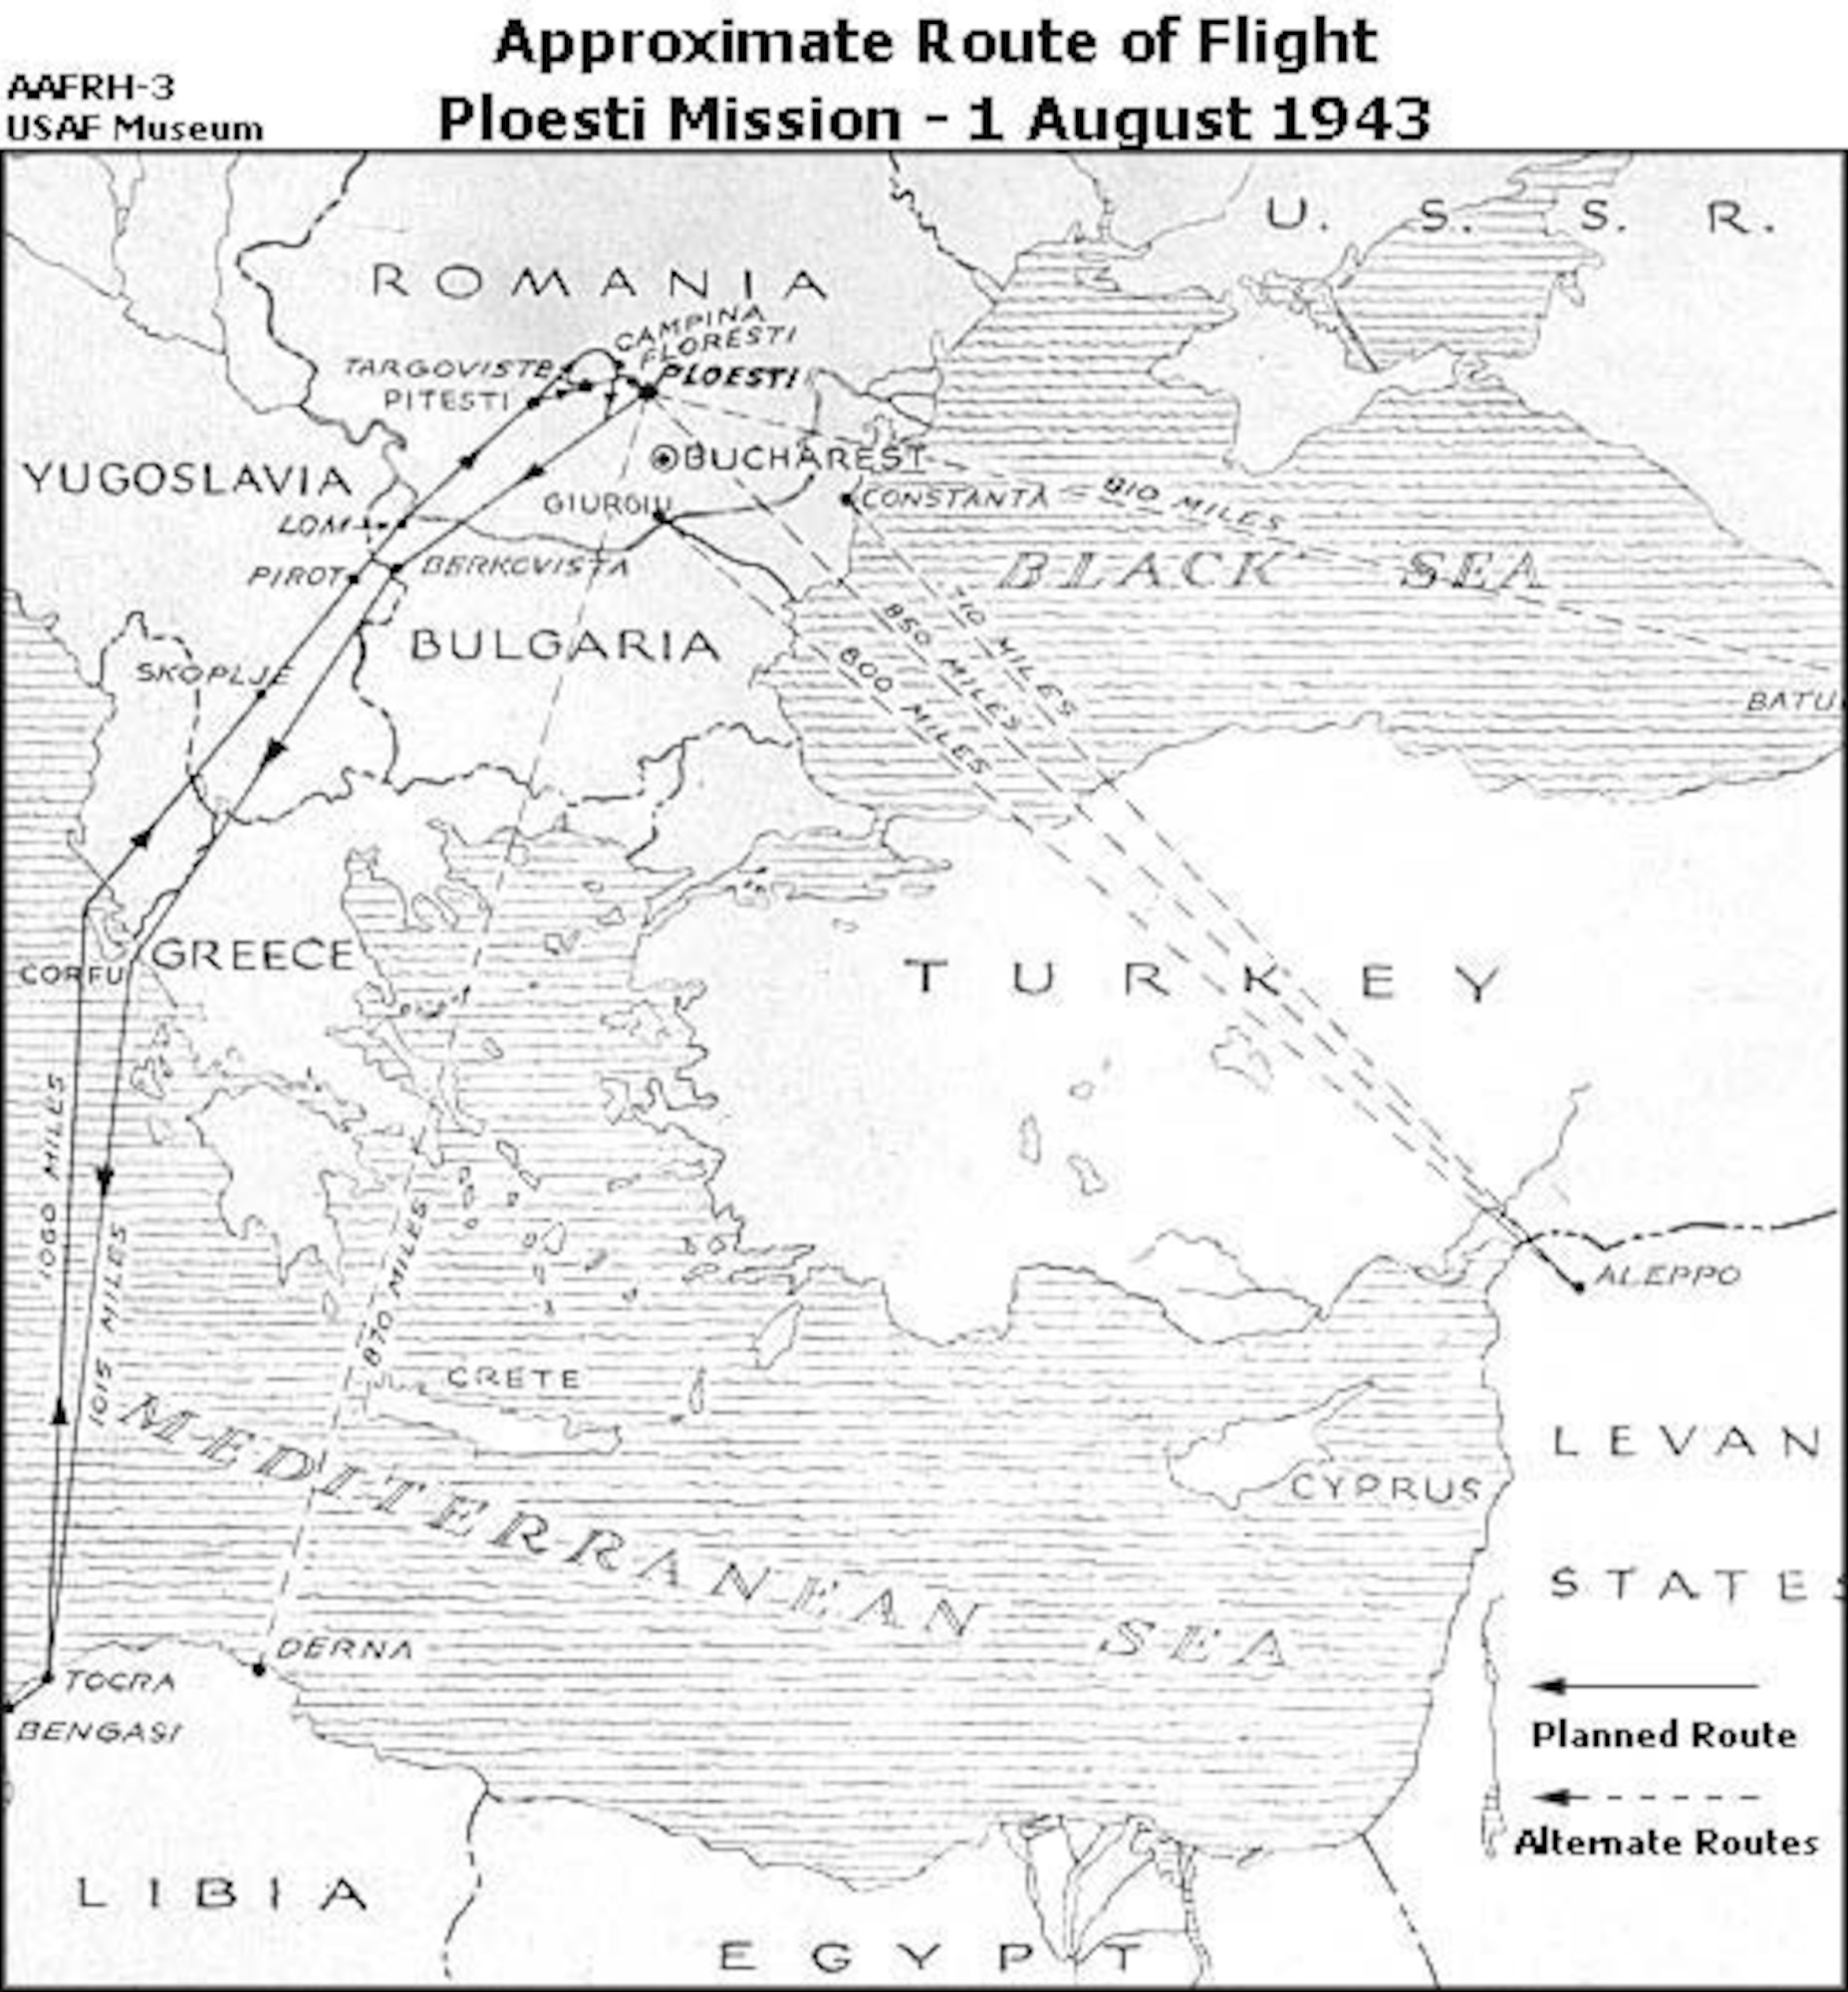 Approximate Route of Flight, Ploesti Mission - 1 August 1943. (U.S. Air Force photo)